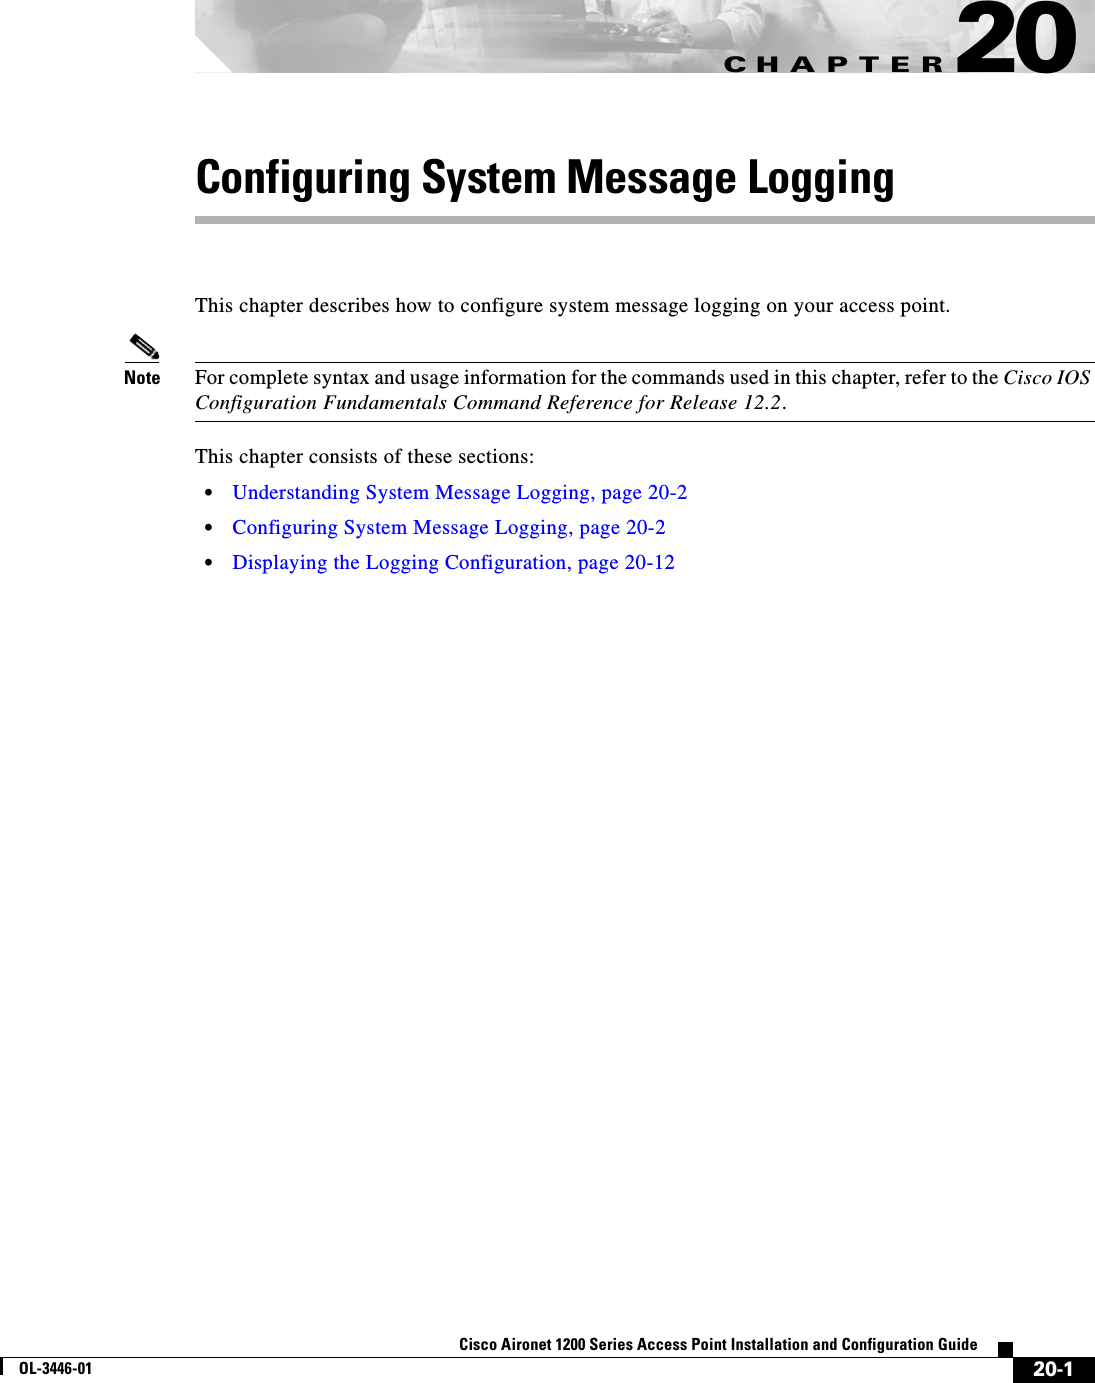 CHAPTER20-1Cisco Aironet 1200 Series Access Point Installation and Configuration GuideOL-3446-0120Configuring System Message LoggingThis chapter describes how to configure system message logging on your access point.Note For complete syntax and usage information for the commands used in this chapter, refer to the Cisco IOS Configuration Fundamentals Command Reference for Release 12.2.This chapter consists of these sections:•Understanding System Message Logging, page 20-2•Configuring System Message Logging, page 20-2•Displaying the Logging Configuration, page 20-12